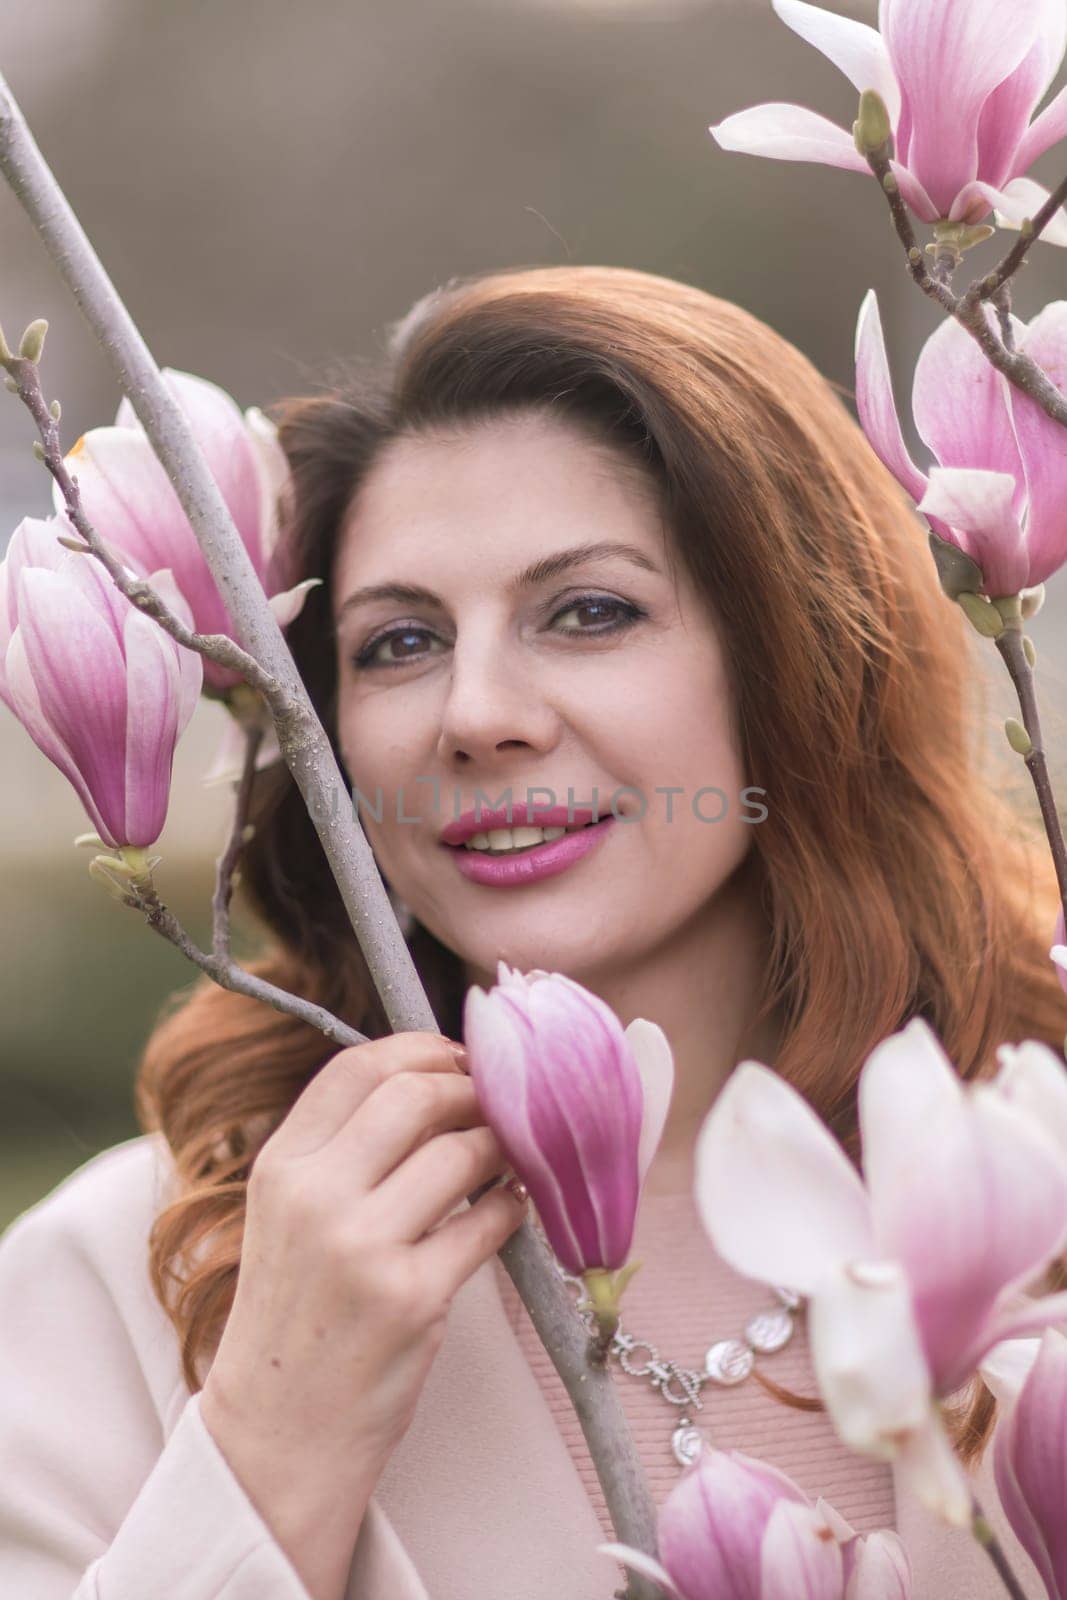 Woman magnolia flowers, surrounded by blossoming trees., hair down, wearing a light coat. Captured during spring, showcasing natural beauty and seasonal change. by Matiunina